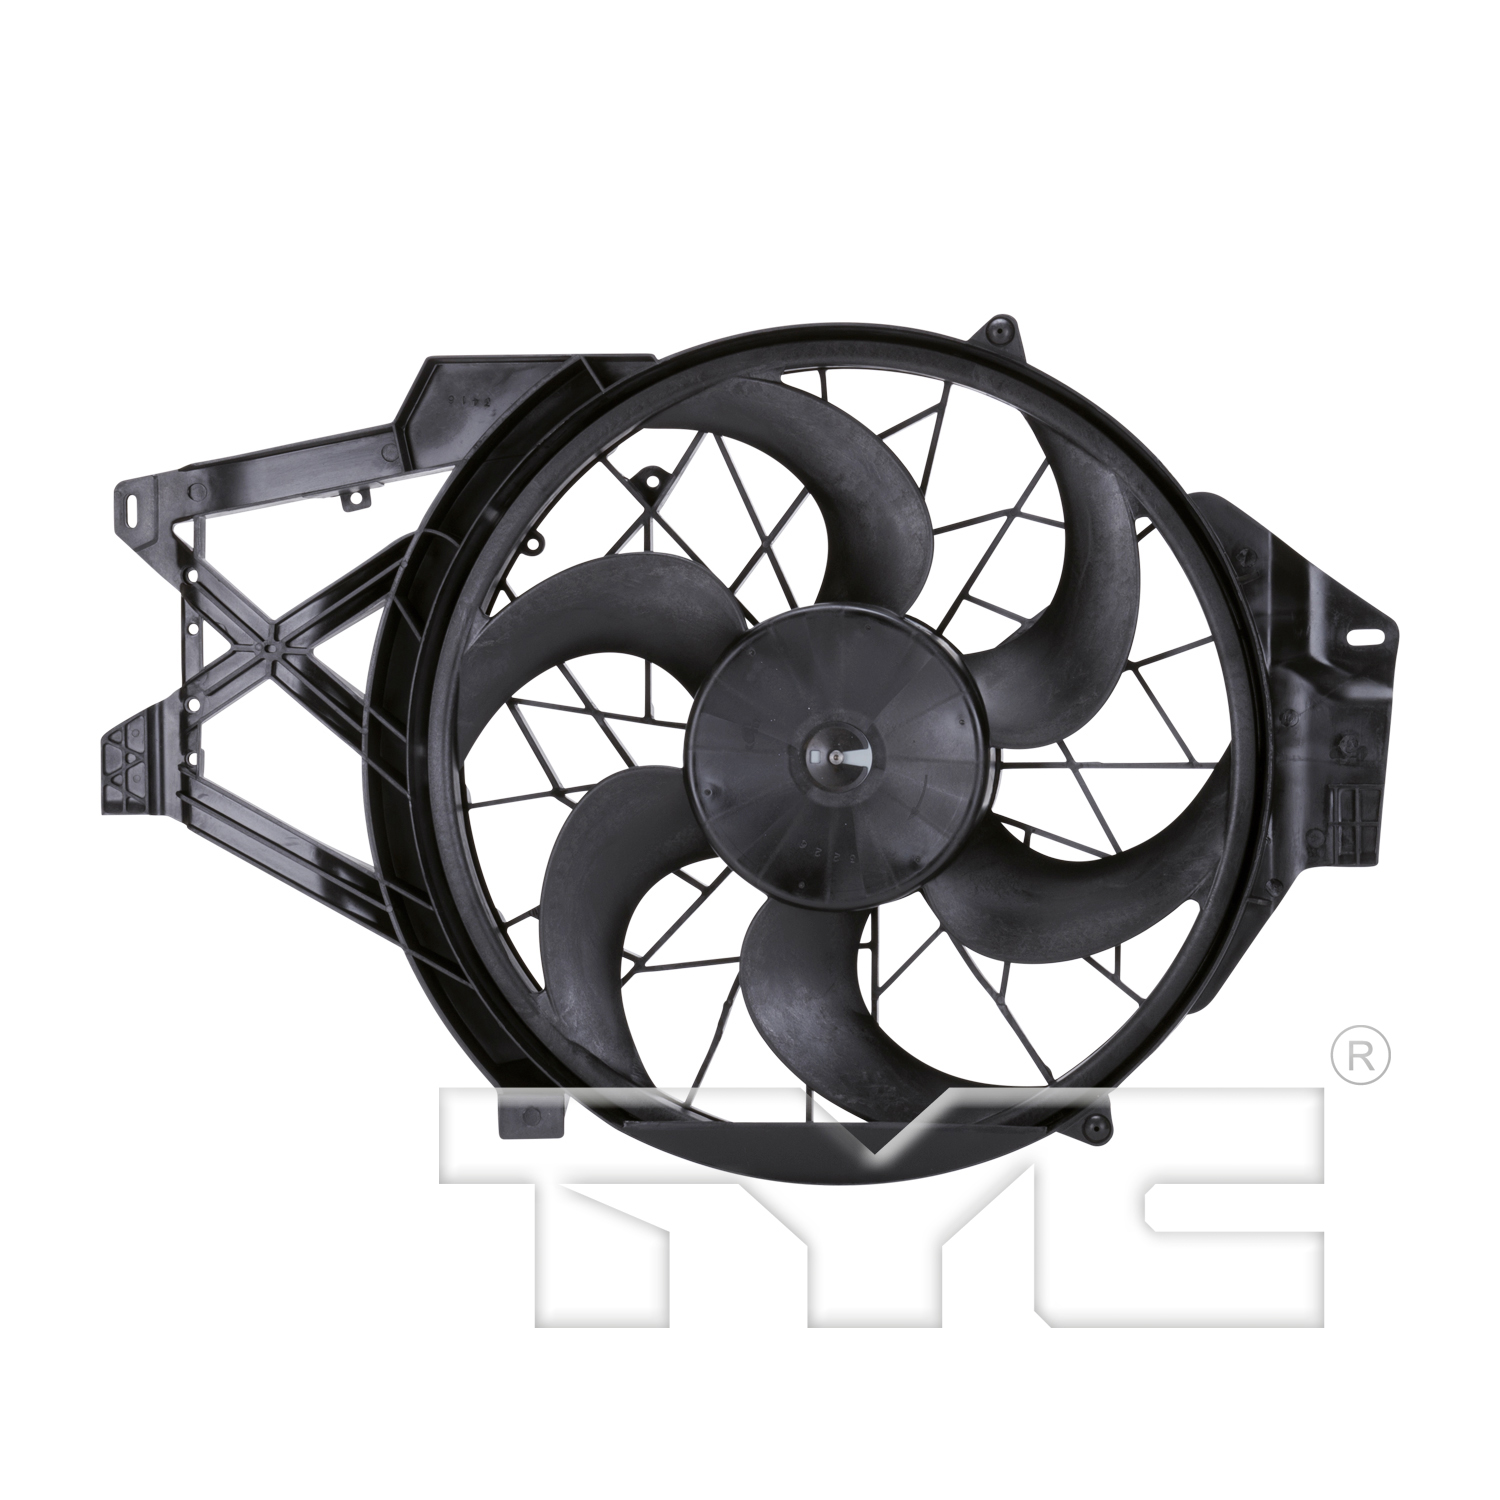 Aftermarket FAN ASSEMBLY/FAN SHROUDS for FORD - MUSTANG, MUSTANG,99-04,Radiator cooling fan assy